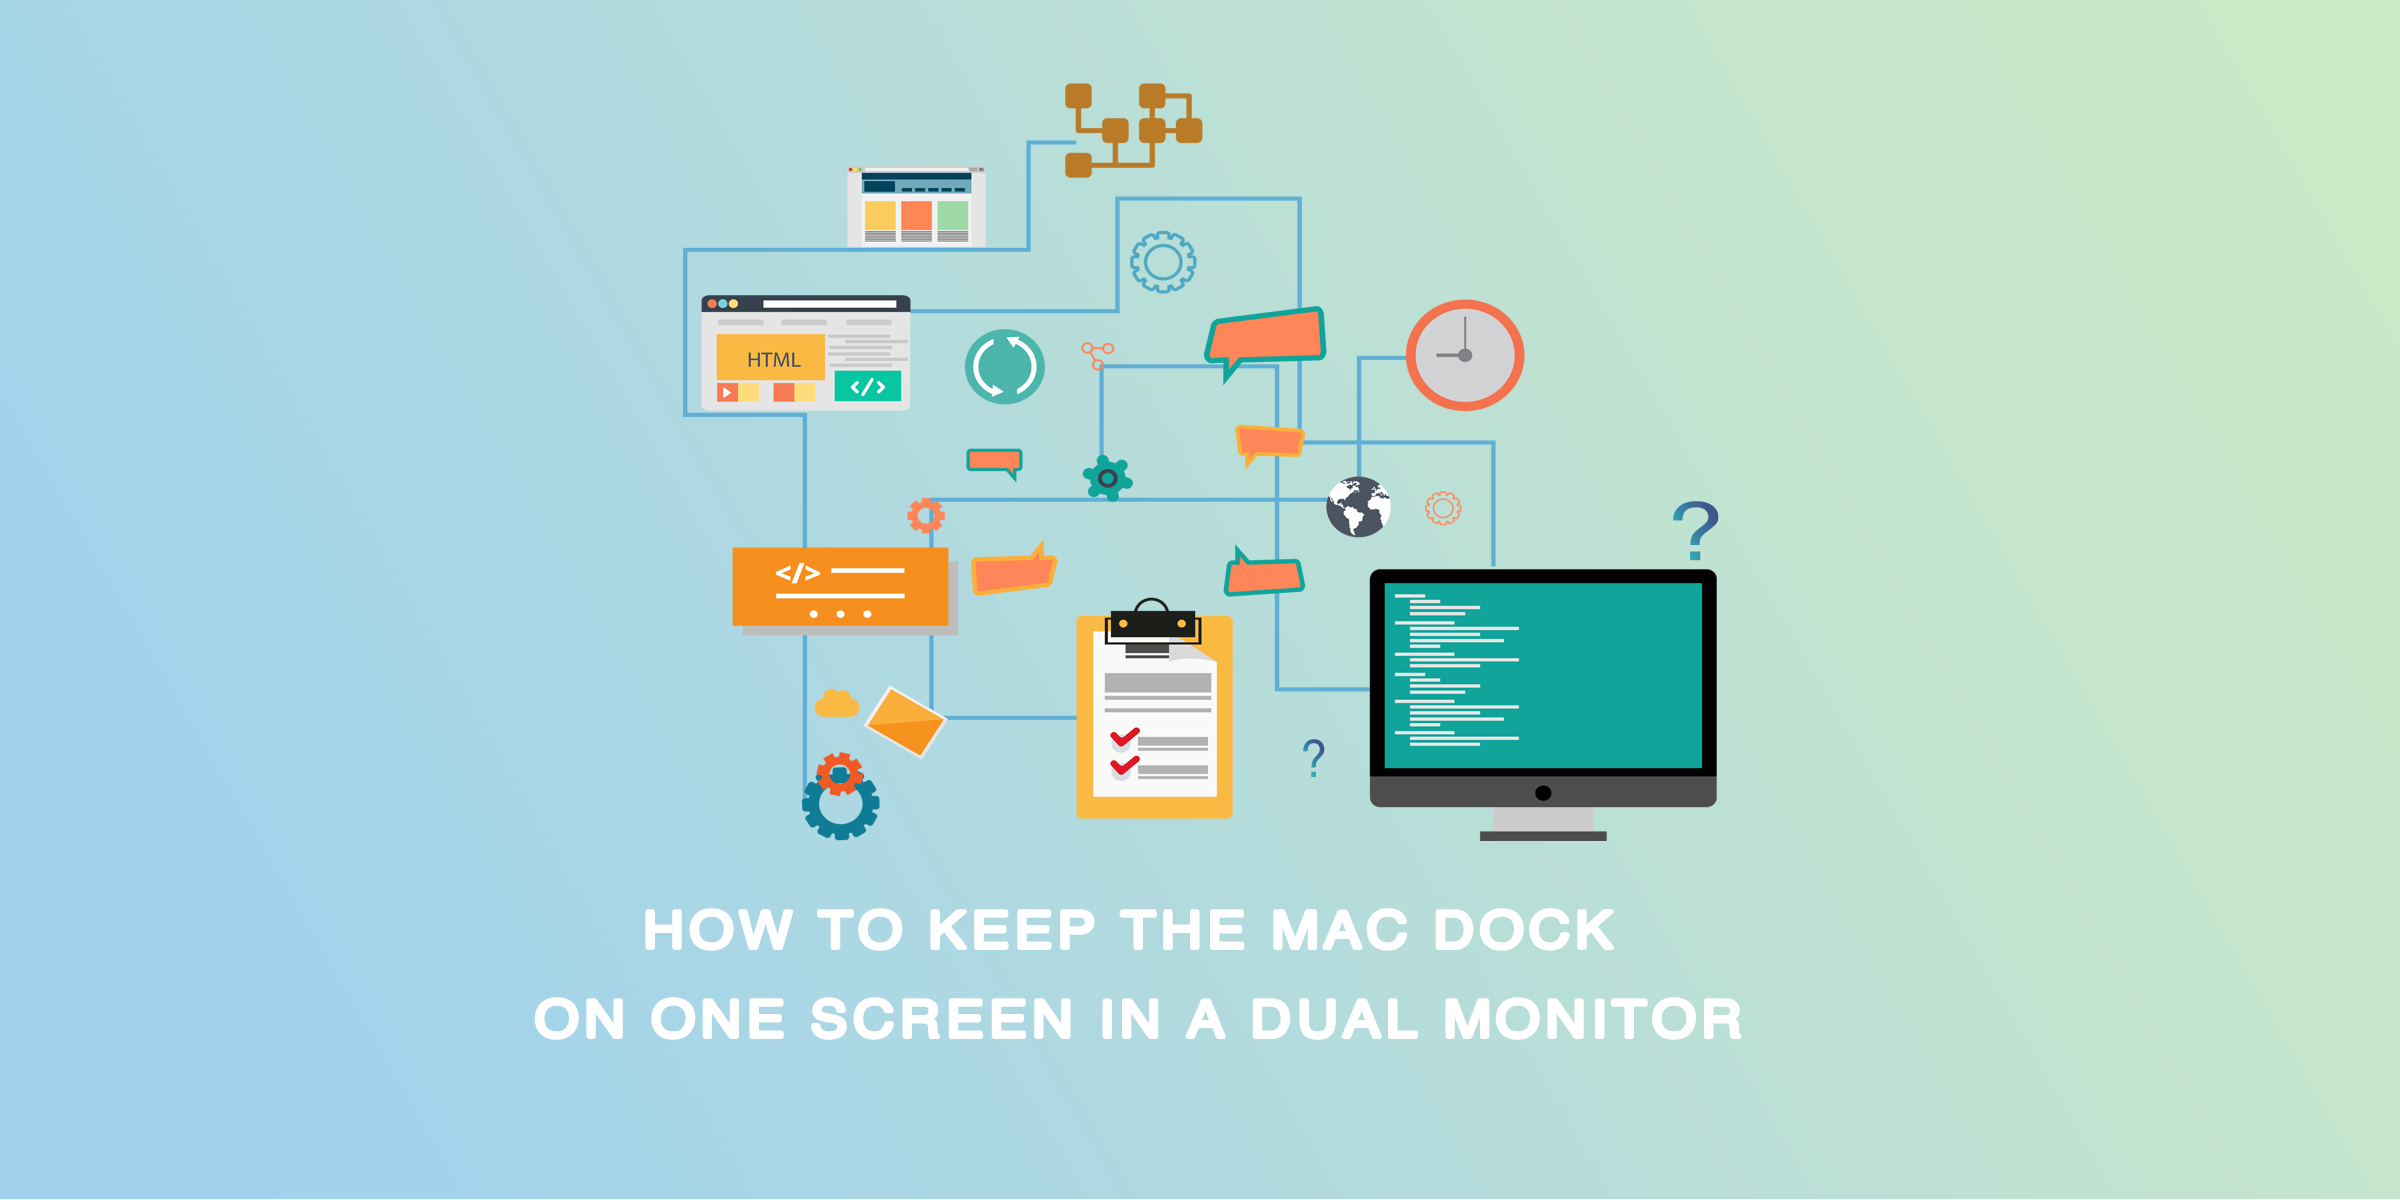 How to Keep the Mac Dock on One Screen in a Dual Monitor - Apple & Microsoft News,Tutorials,Security Tips|Cleaner One Blog